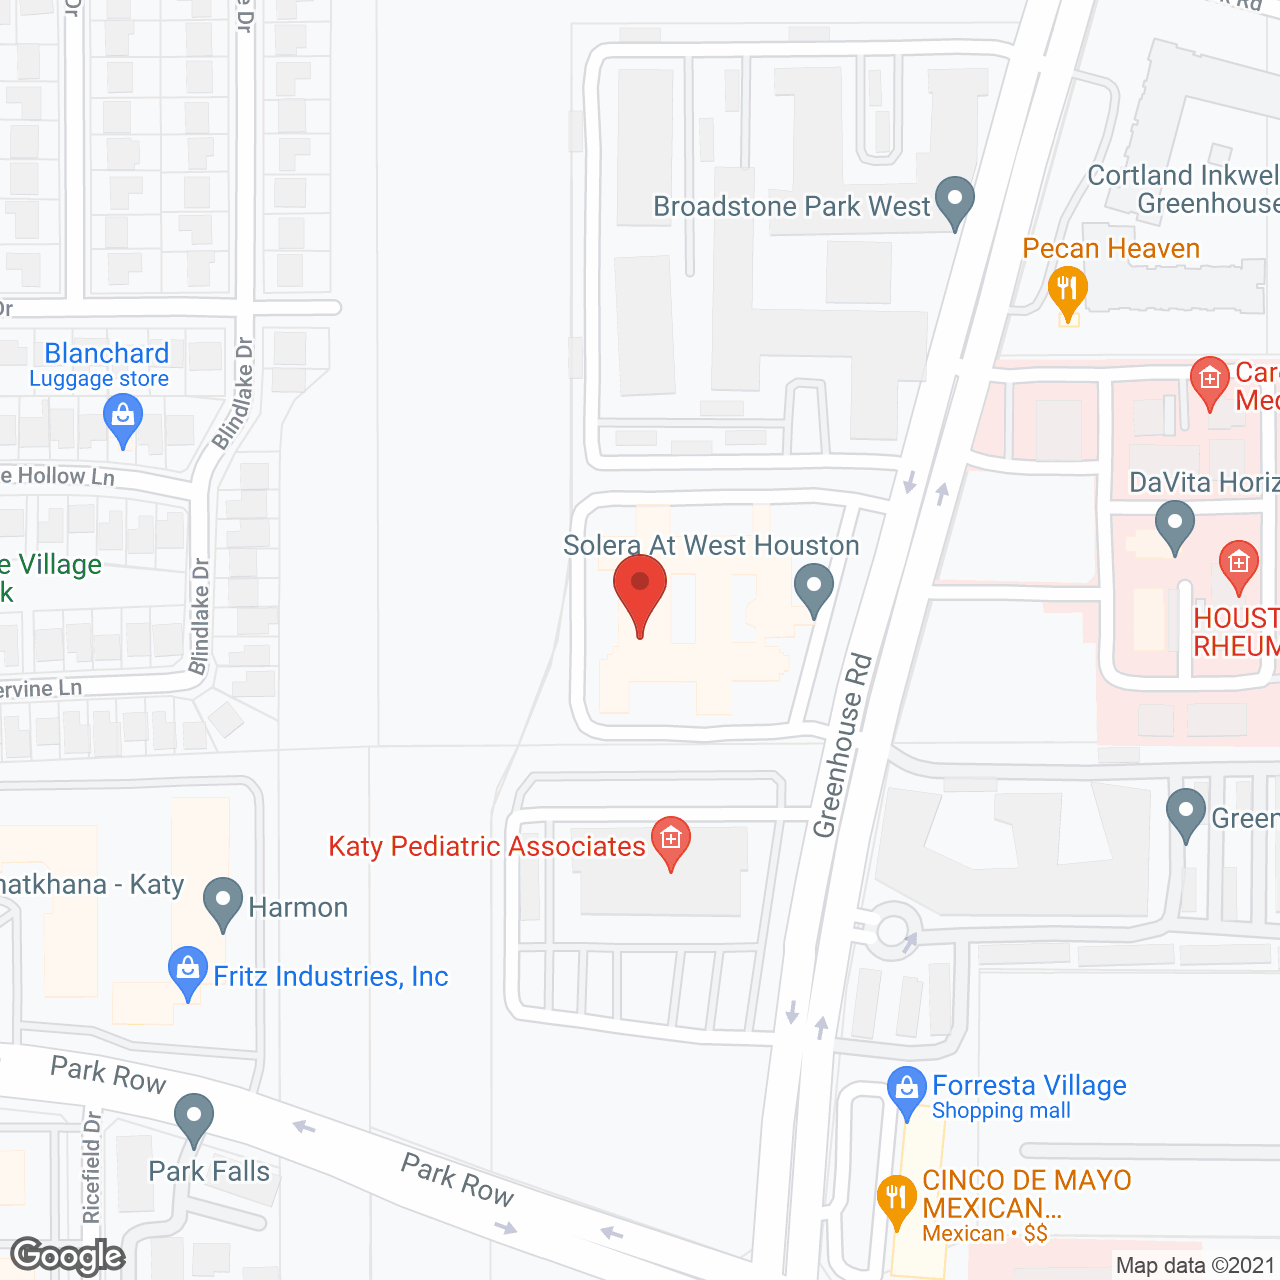 Solera At West Houston in google map